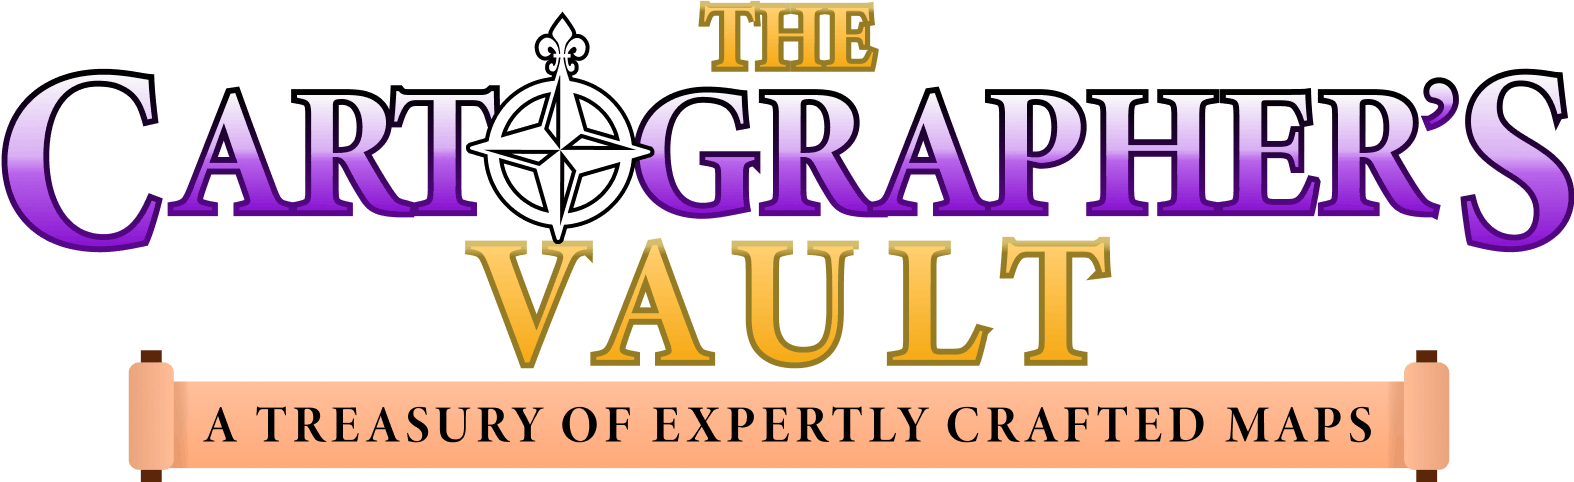 The Cartographer's Vault: A Treasury of Expertly Crafted Maps